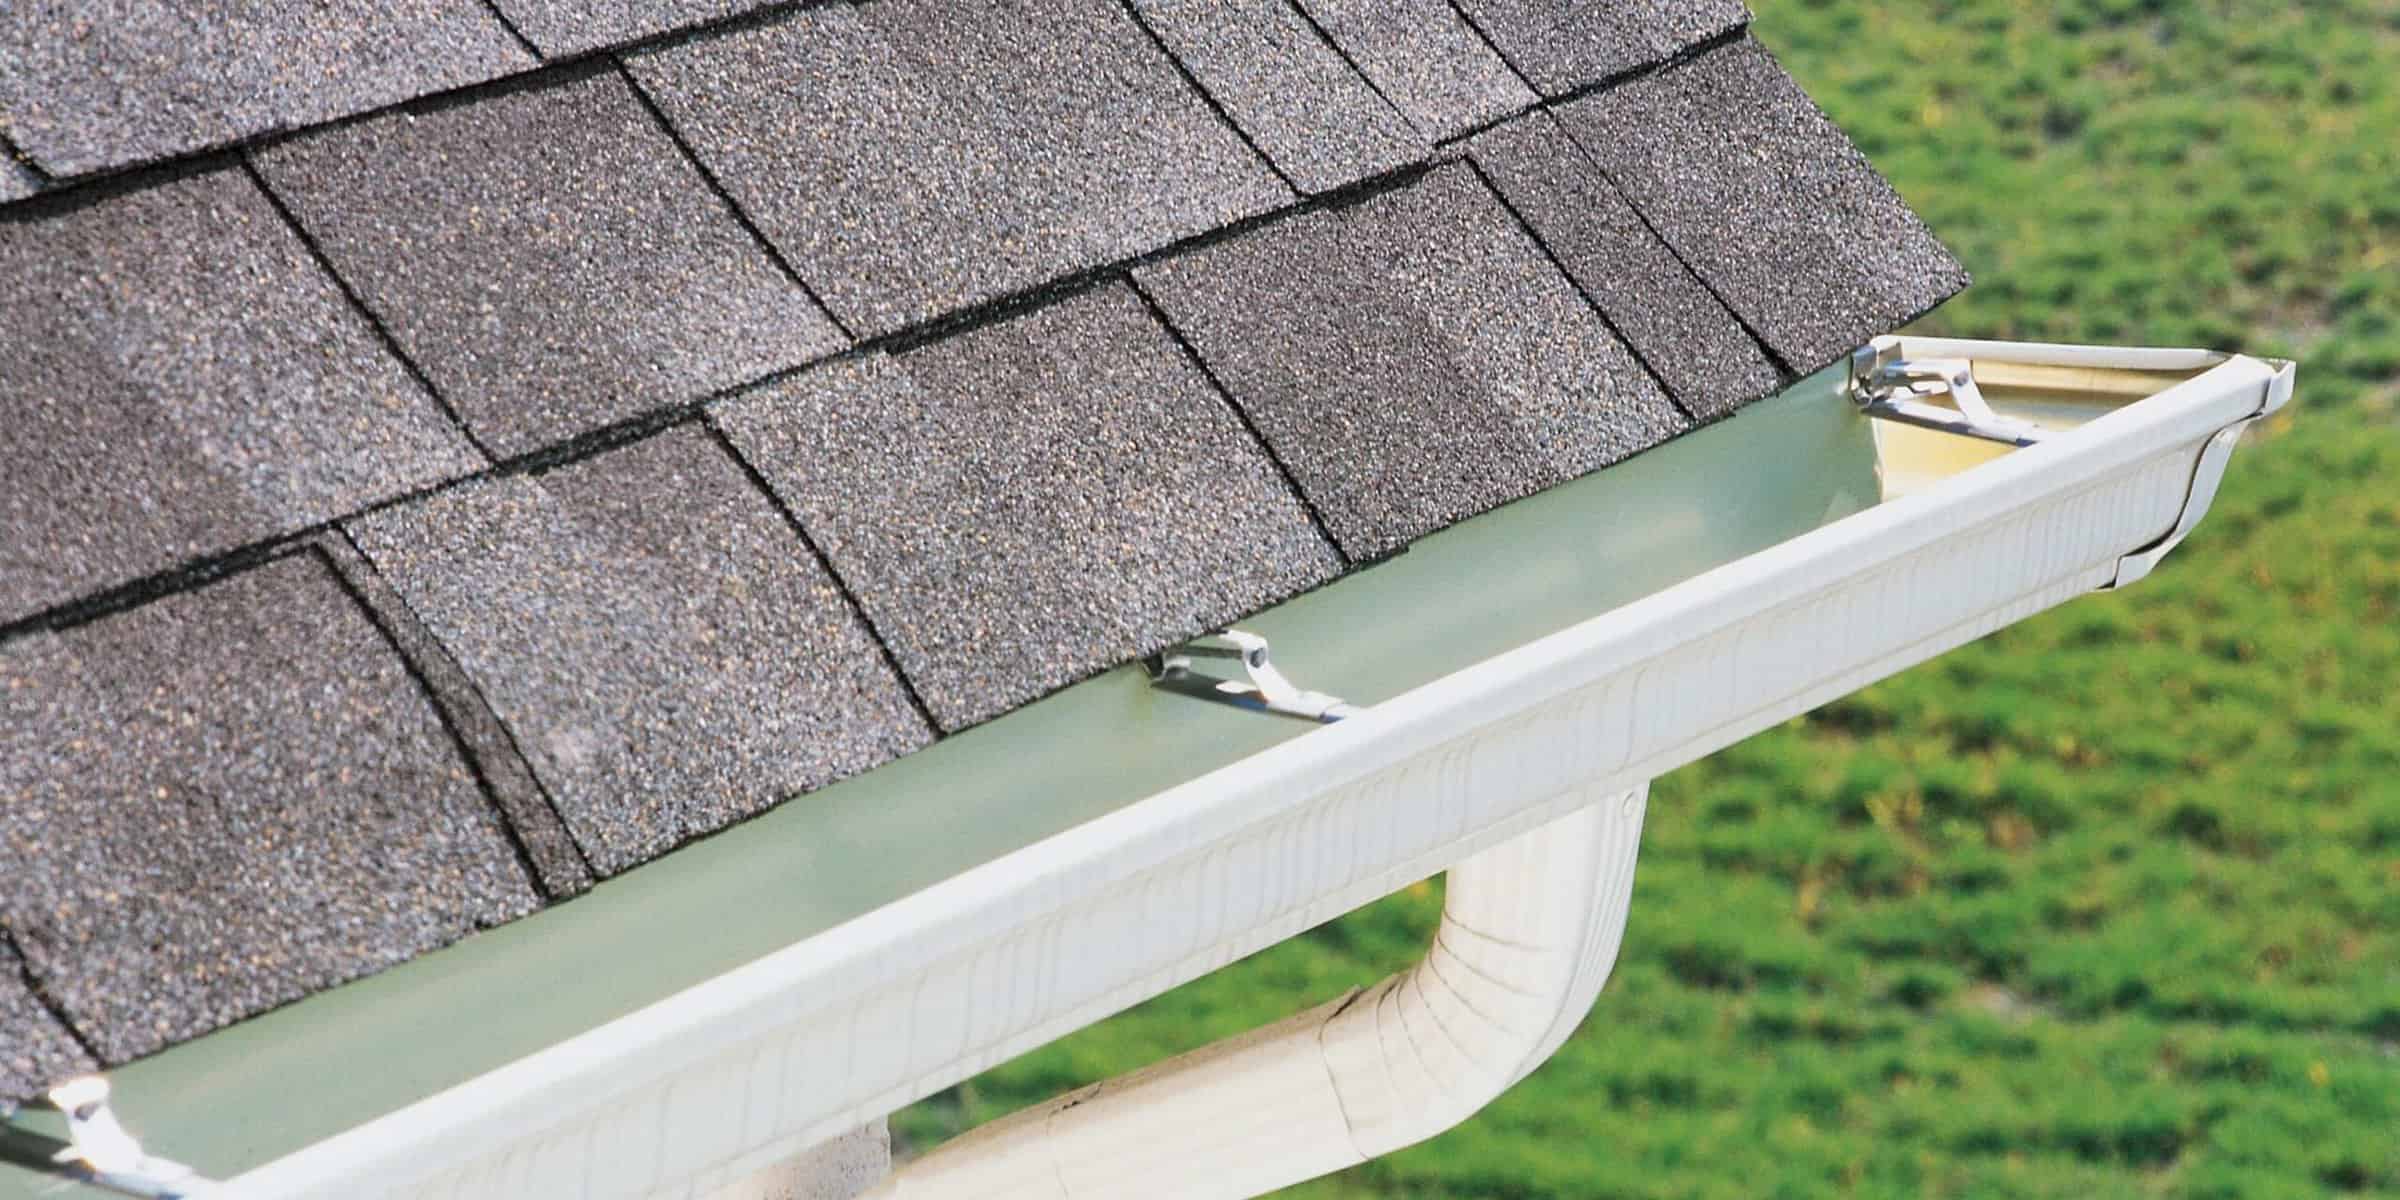 4 Easy Ways For Homemade Gutter Cleaning Solution